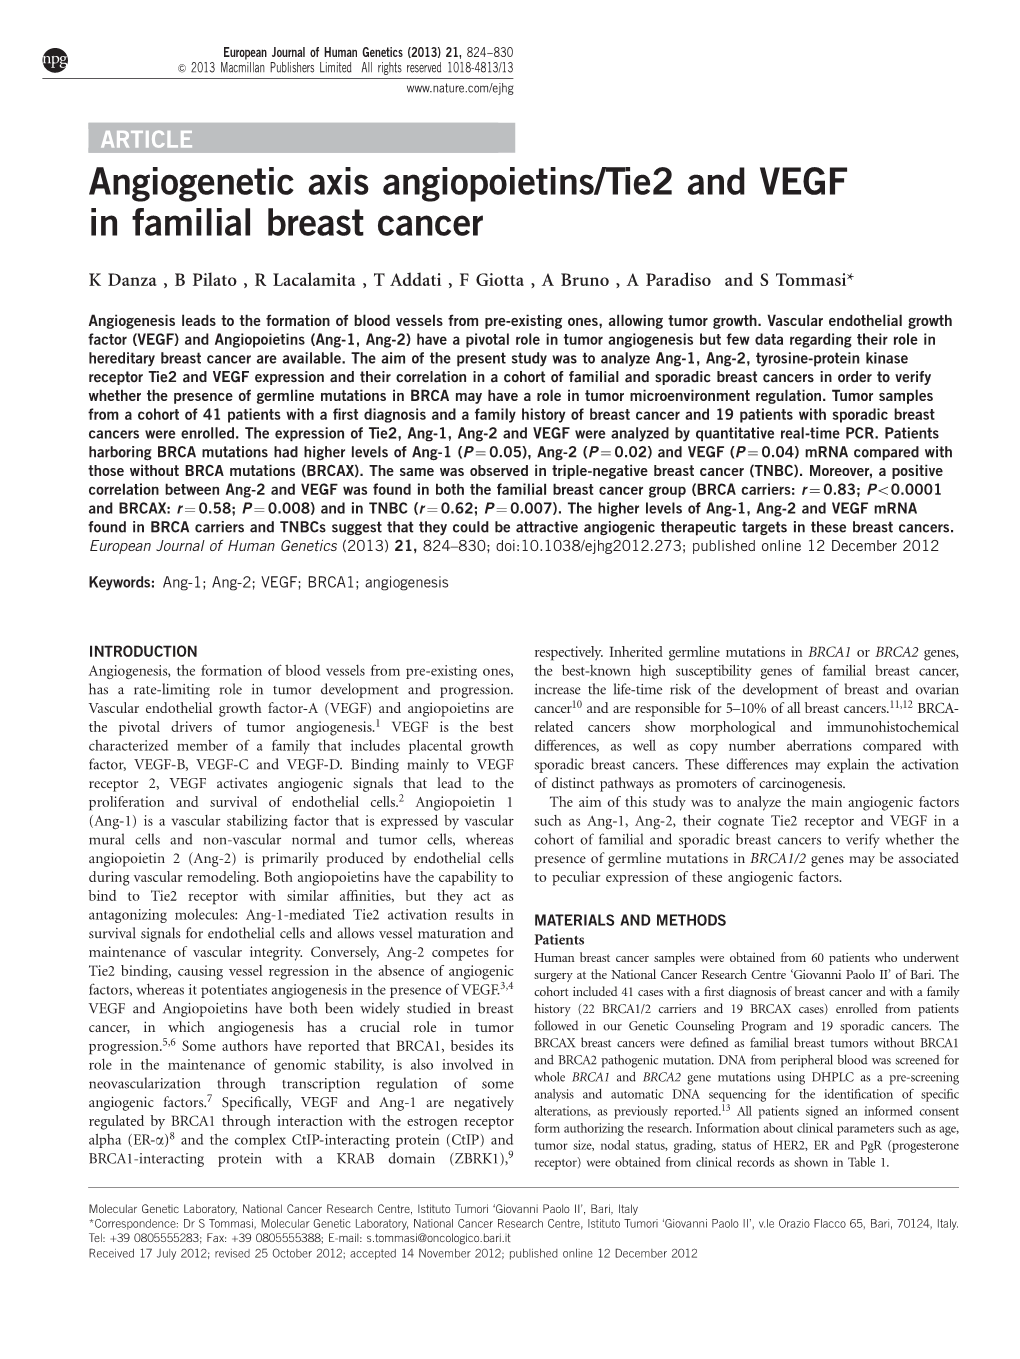 Tie2 and VEGF in Familial Breast Cancer